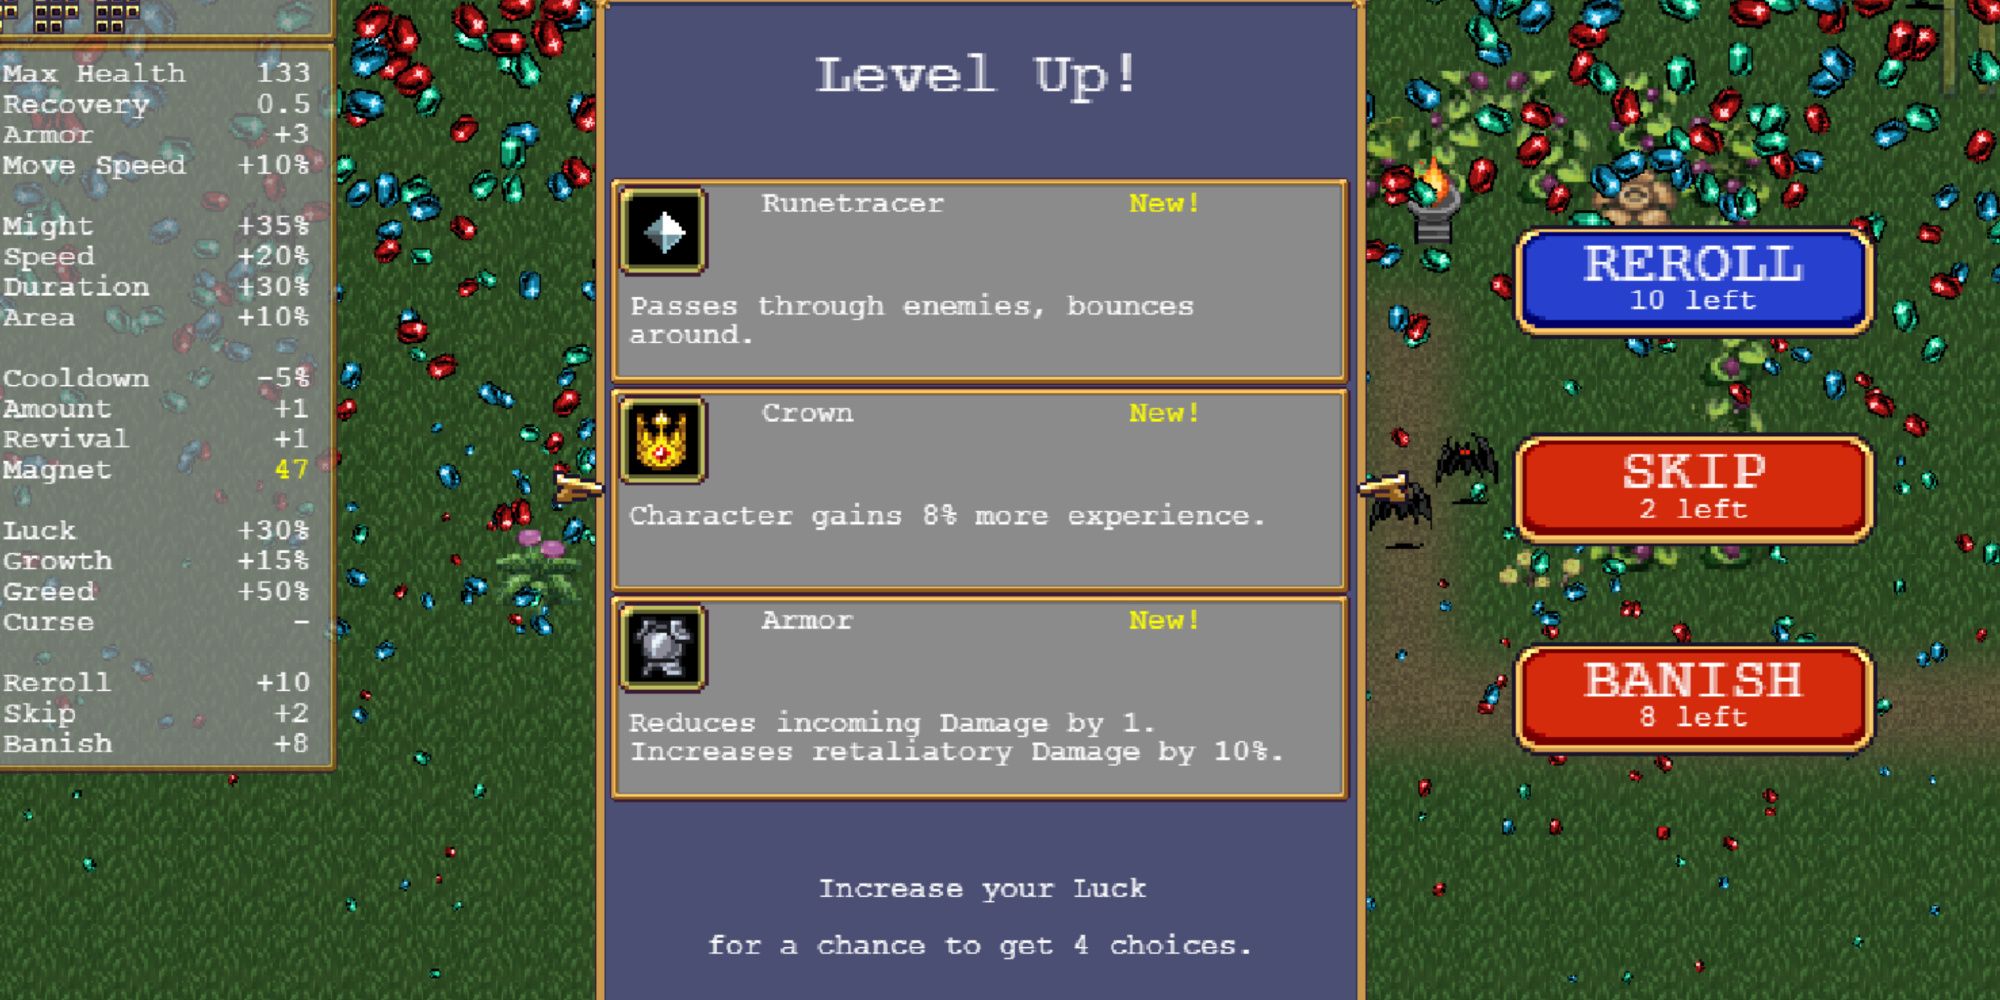 vampire survivors level up menu with crown, armor, and runetracer options